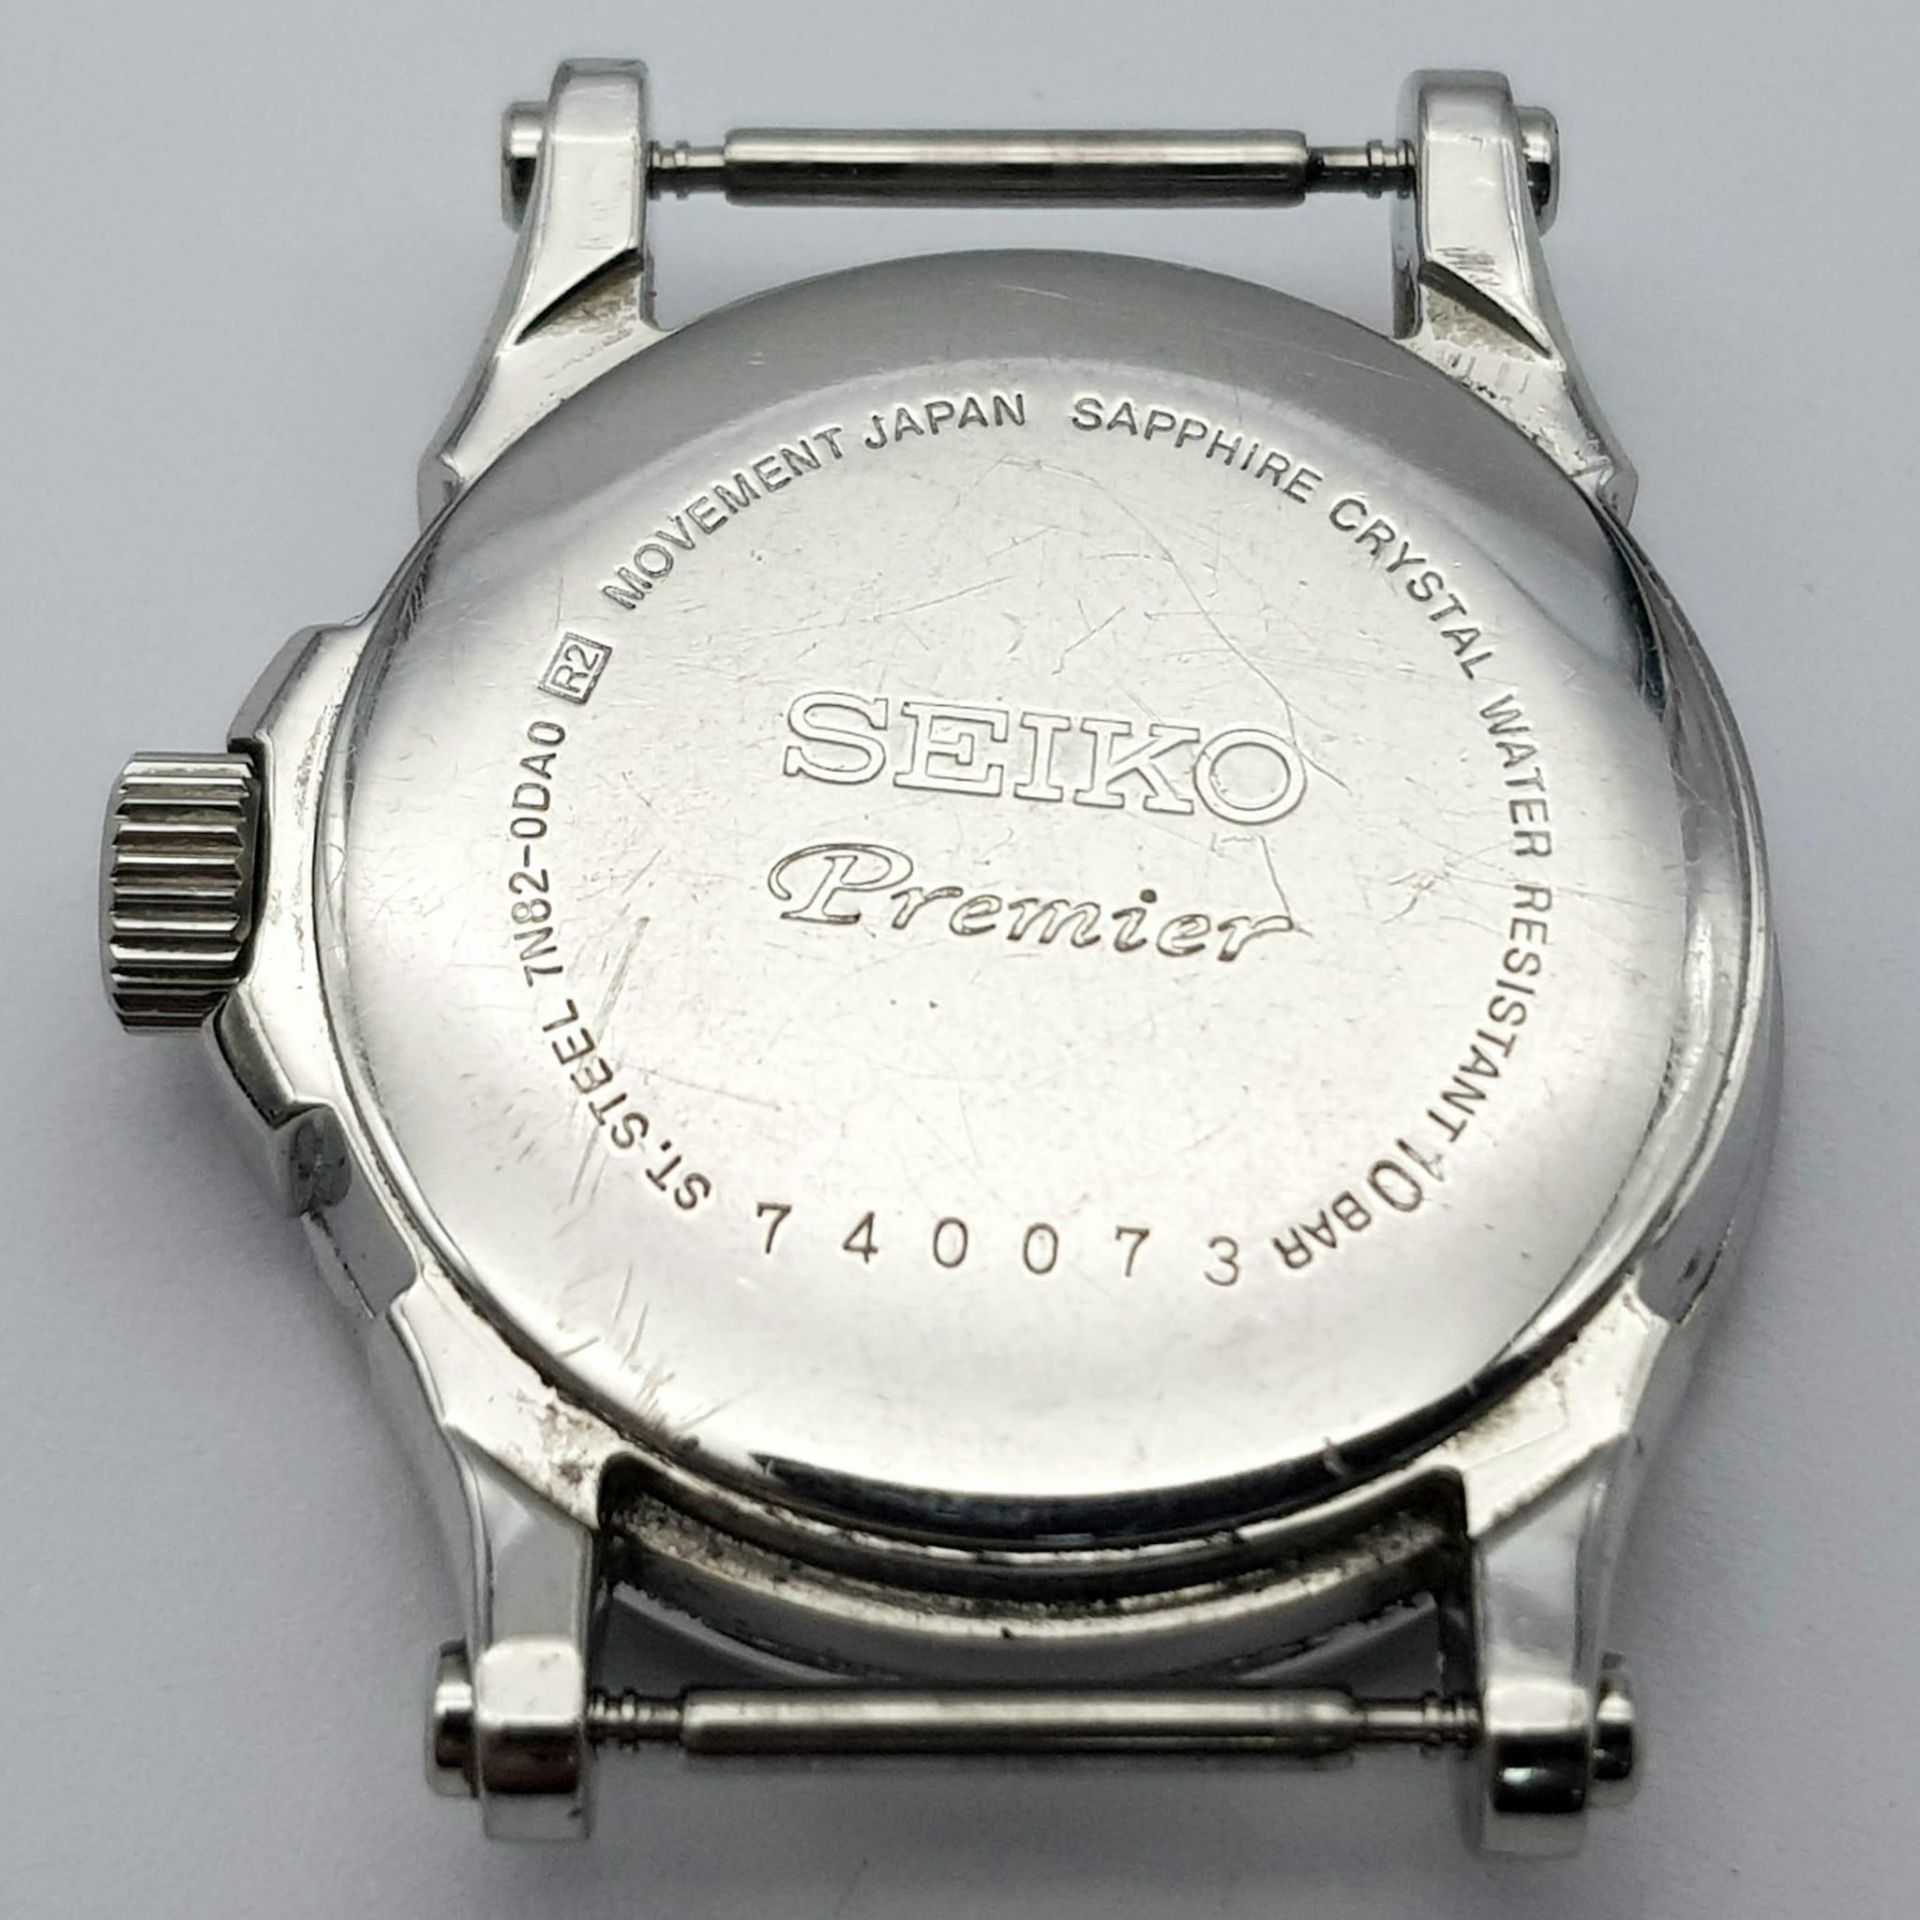 A Seiko Premier Ladies Diamond Watch Case. 27mm. Diamond bezel. Mother of pearl dial. In working - Image 6 of 8